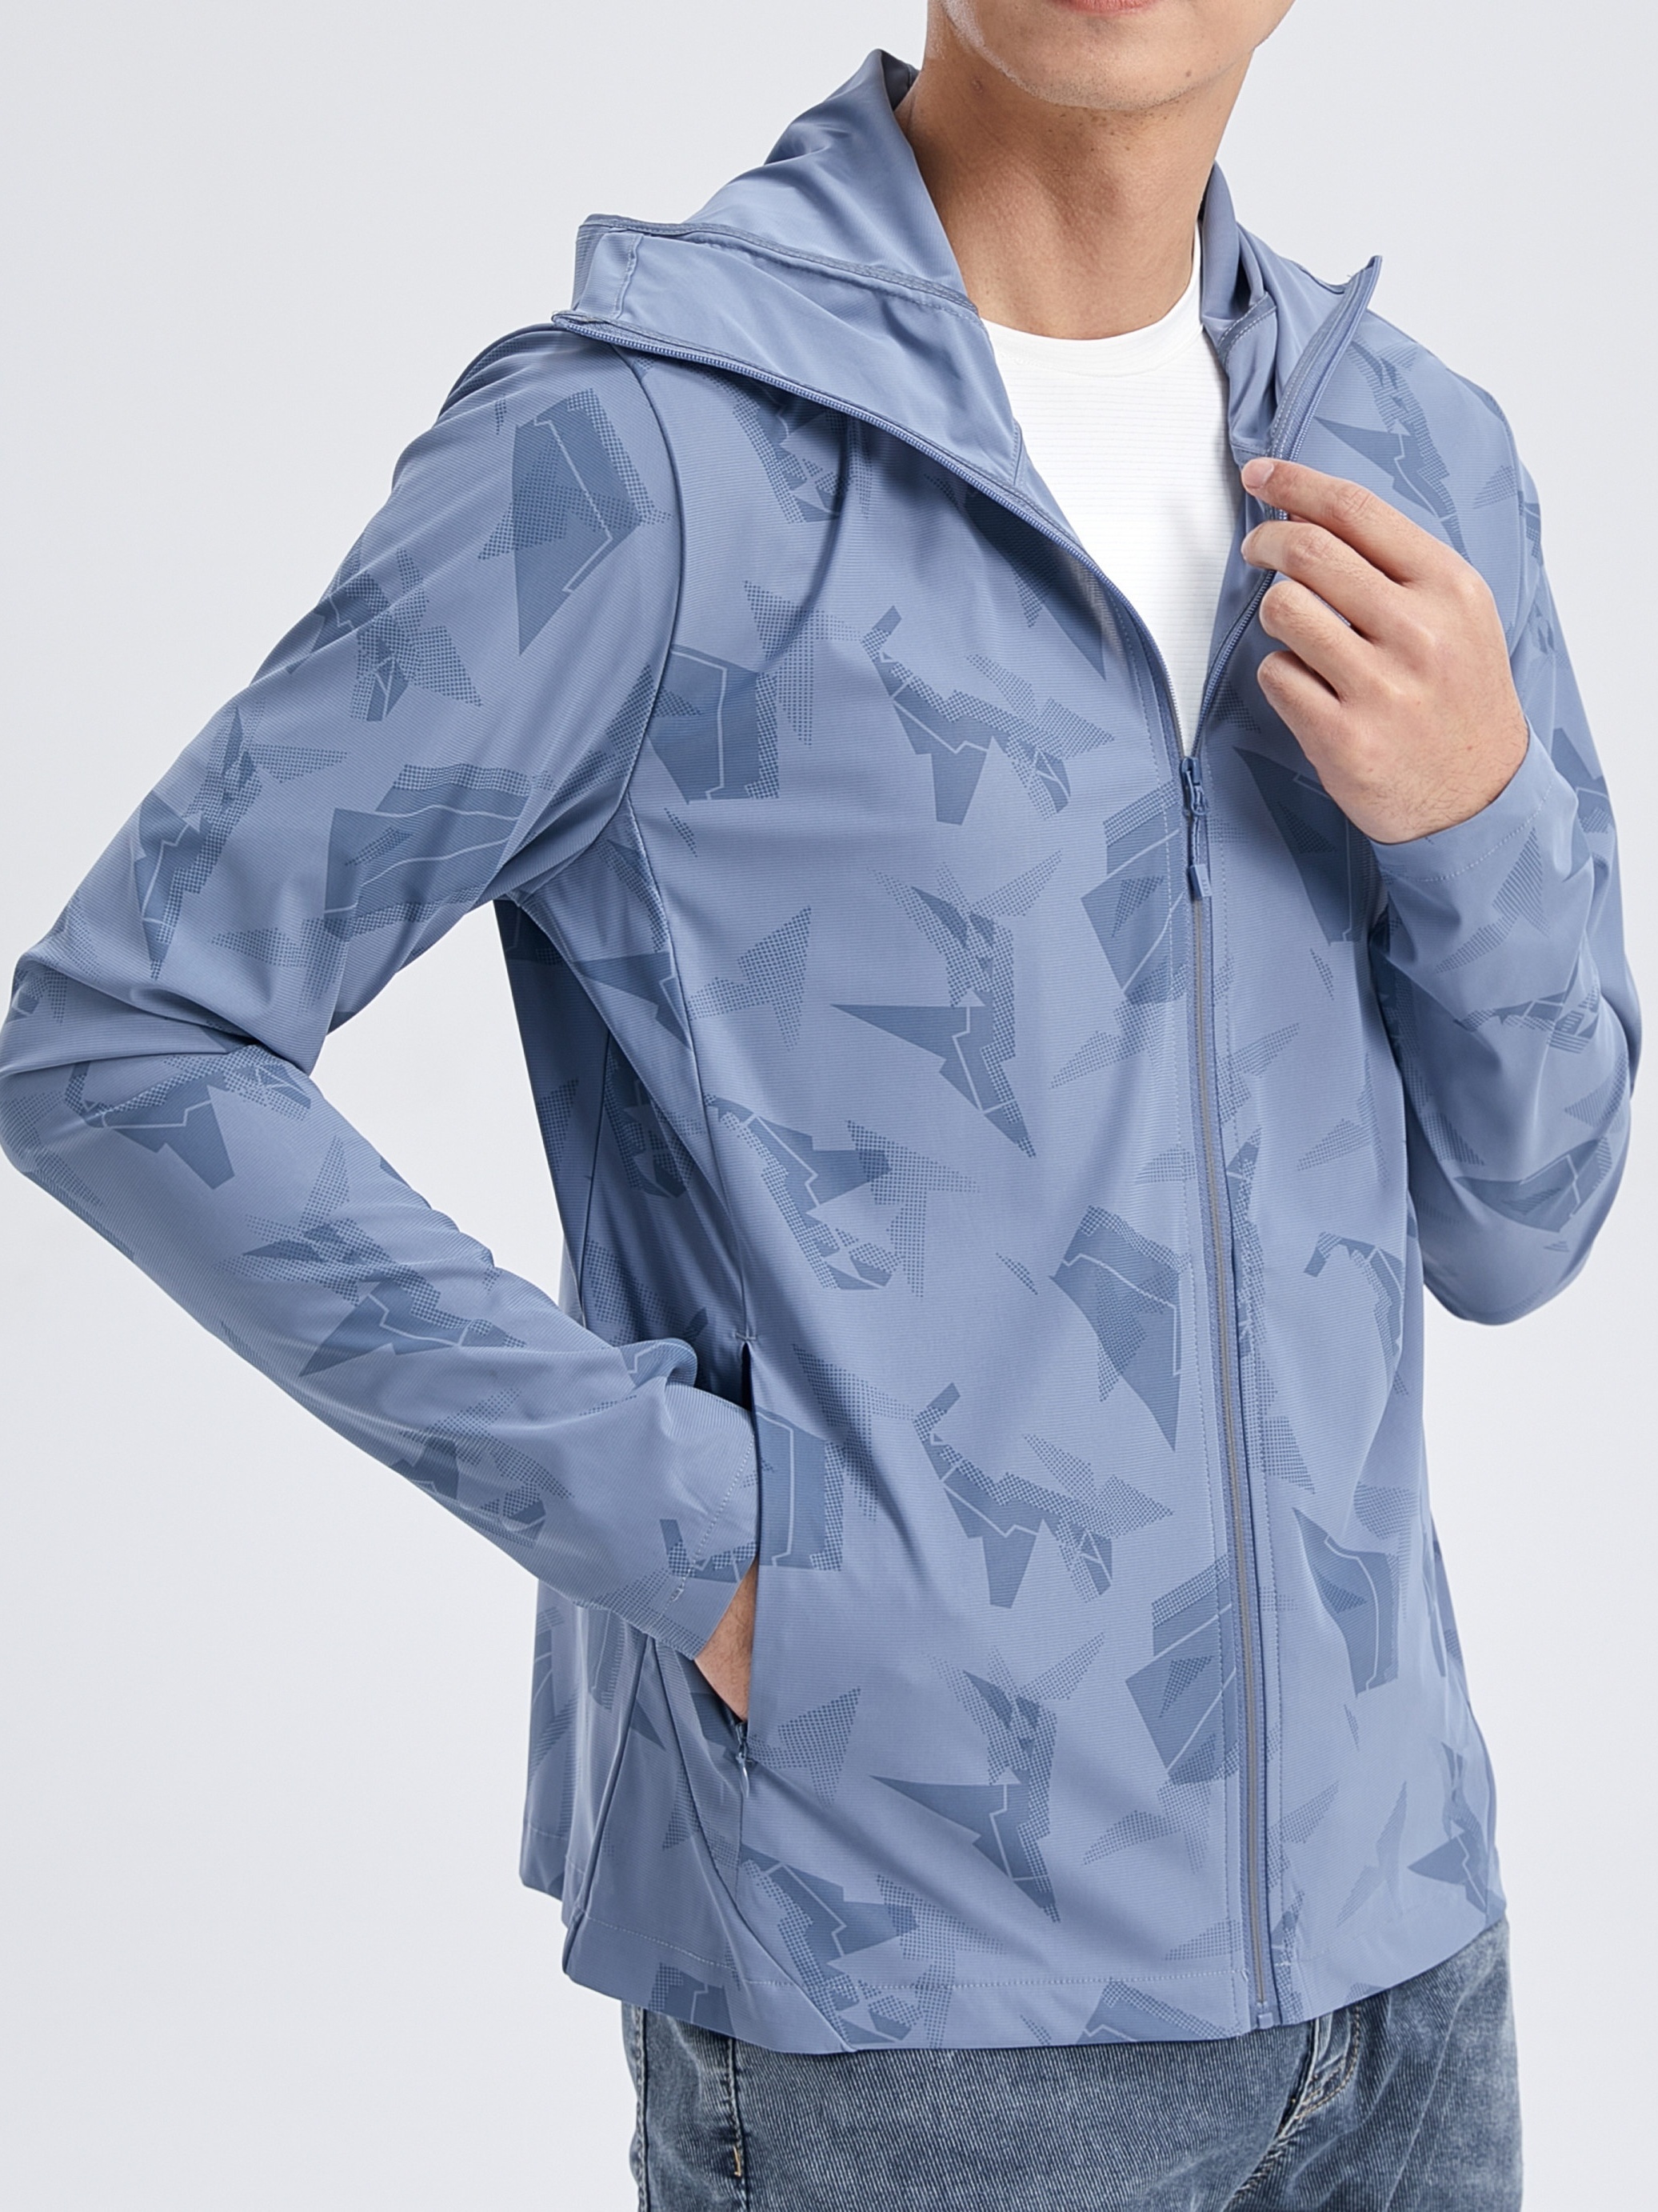 KAMB Light Pink Hoodie Mens Quick Dry Outdoor Fishing Coat With Sun  Protection And Long Sleeves For Running And Sunscreen 230809 From Lu003,  $21.57